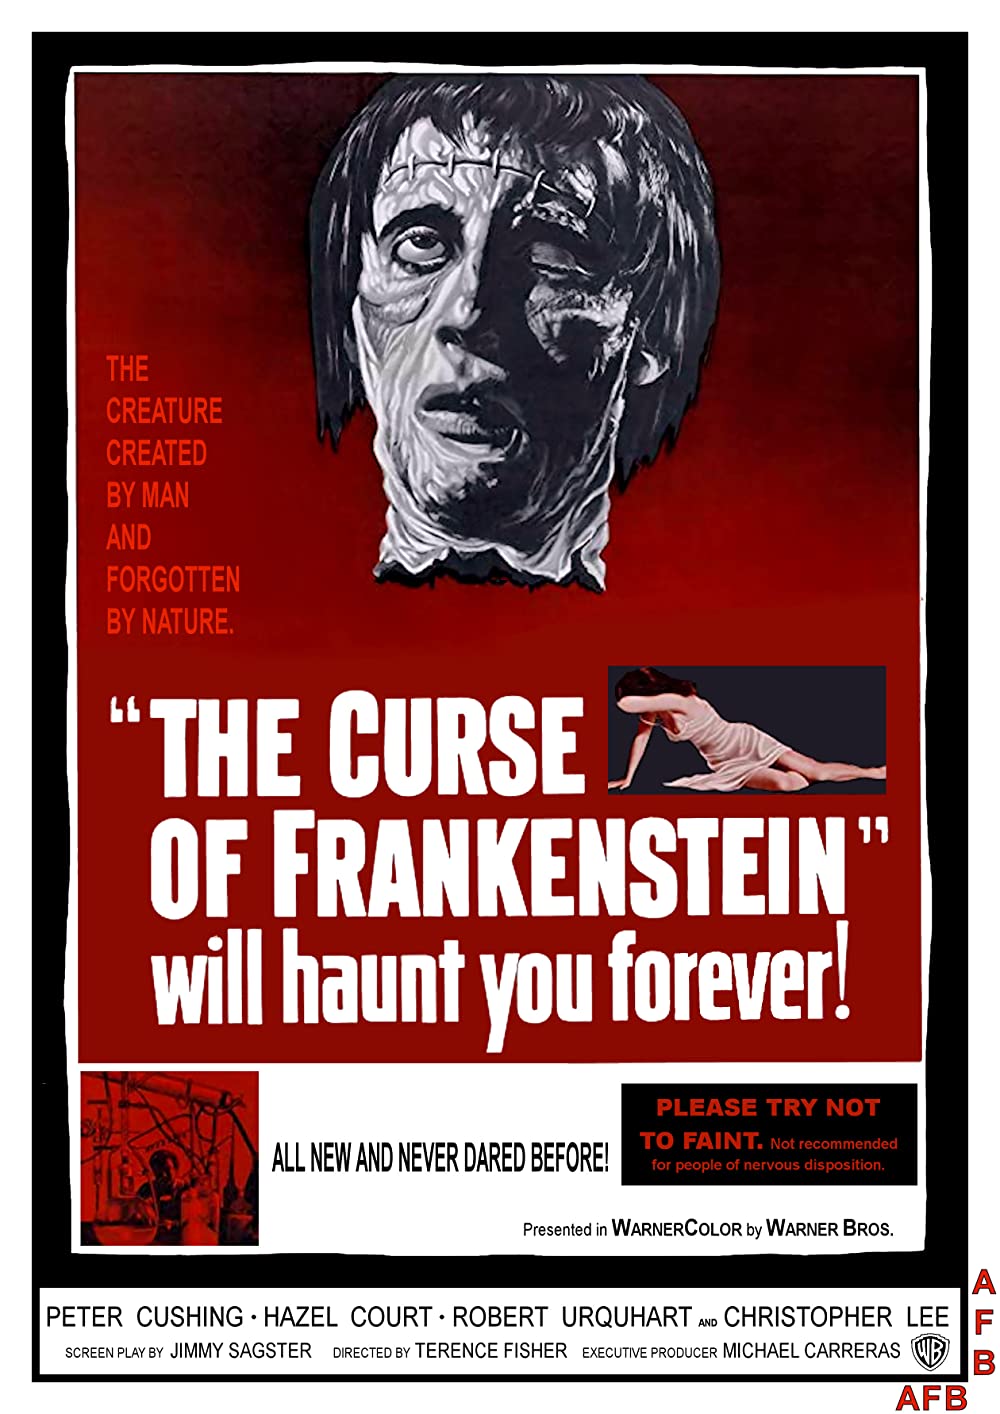 Poster for the movie The Curse of Frankenstein